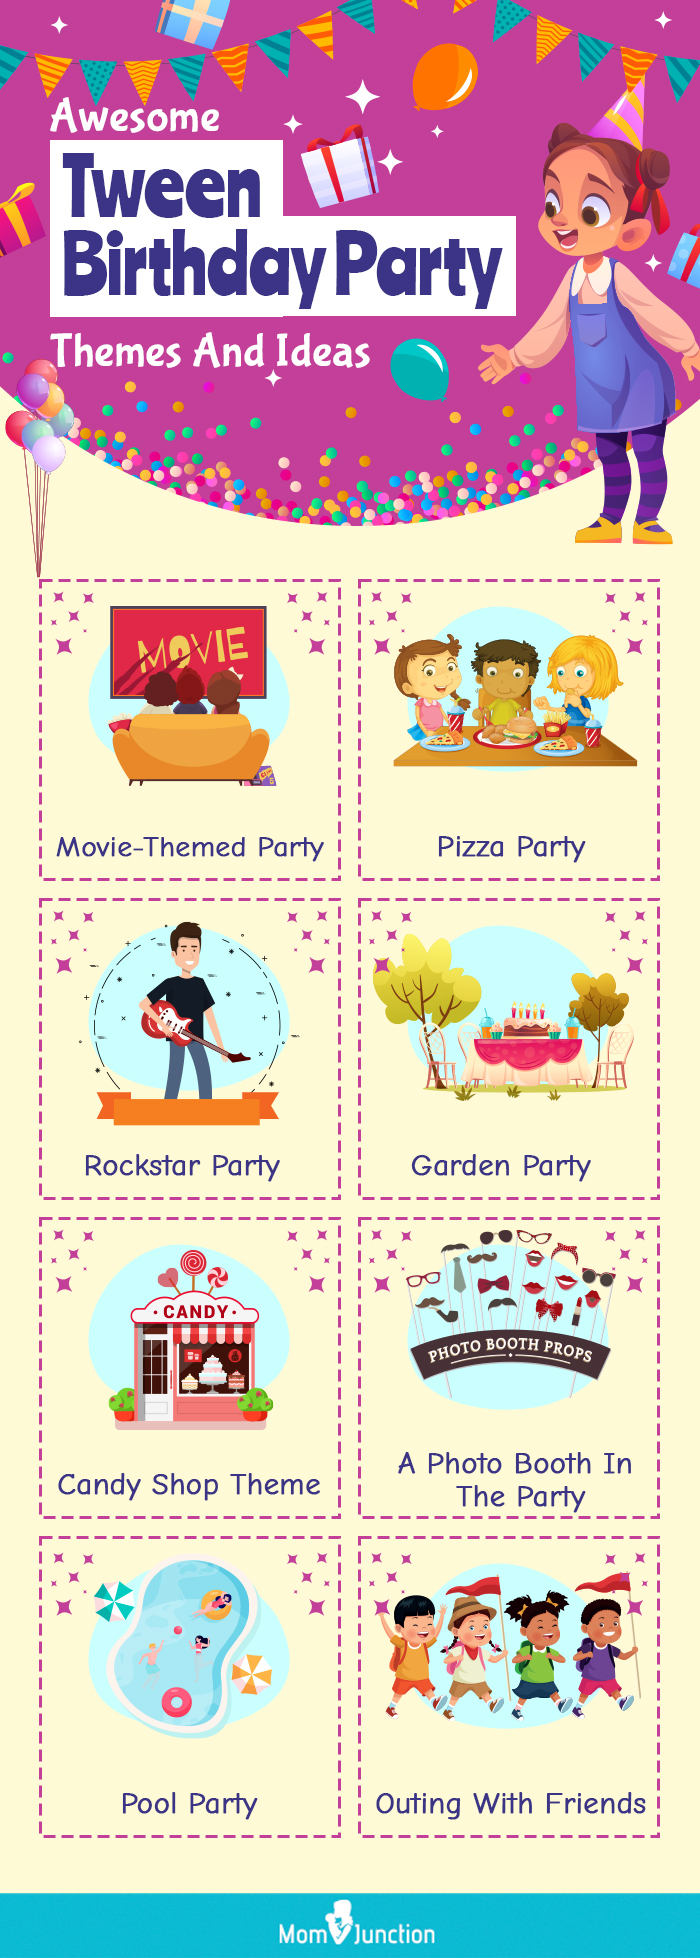 awesome tween birthday party themes and ideas (infographic)